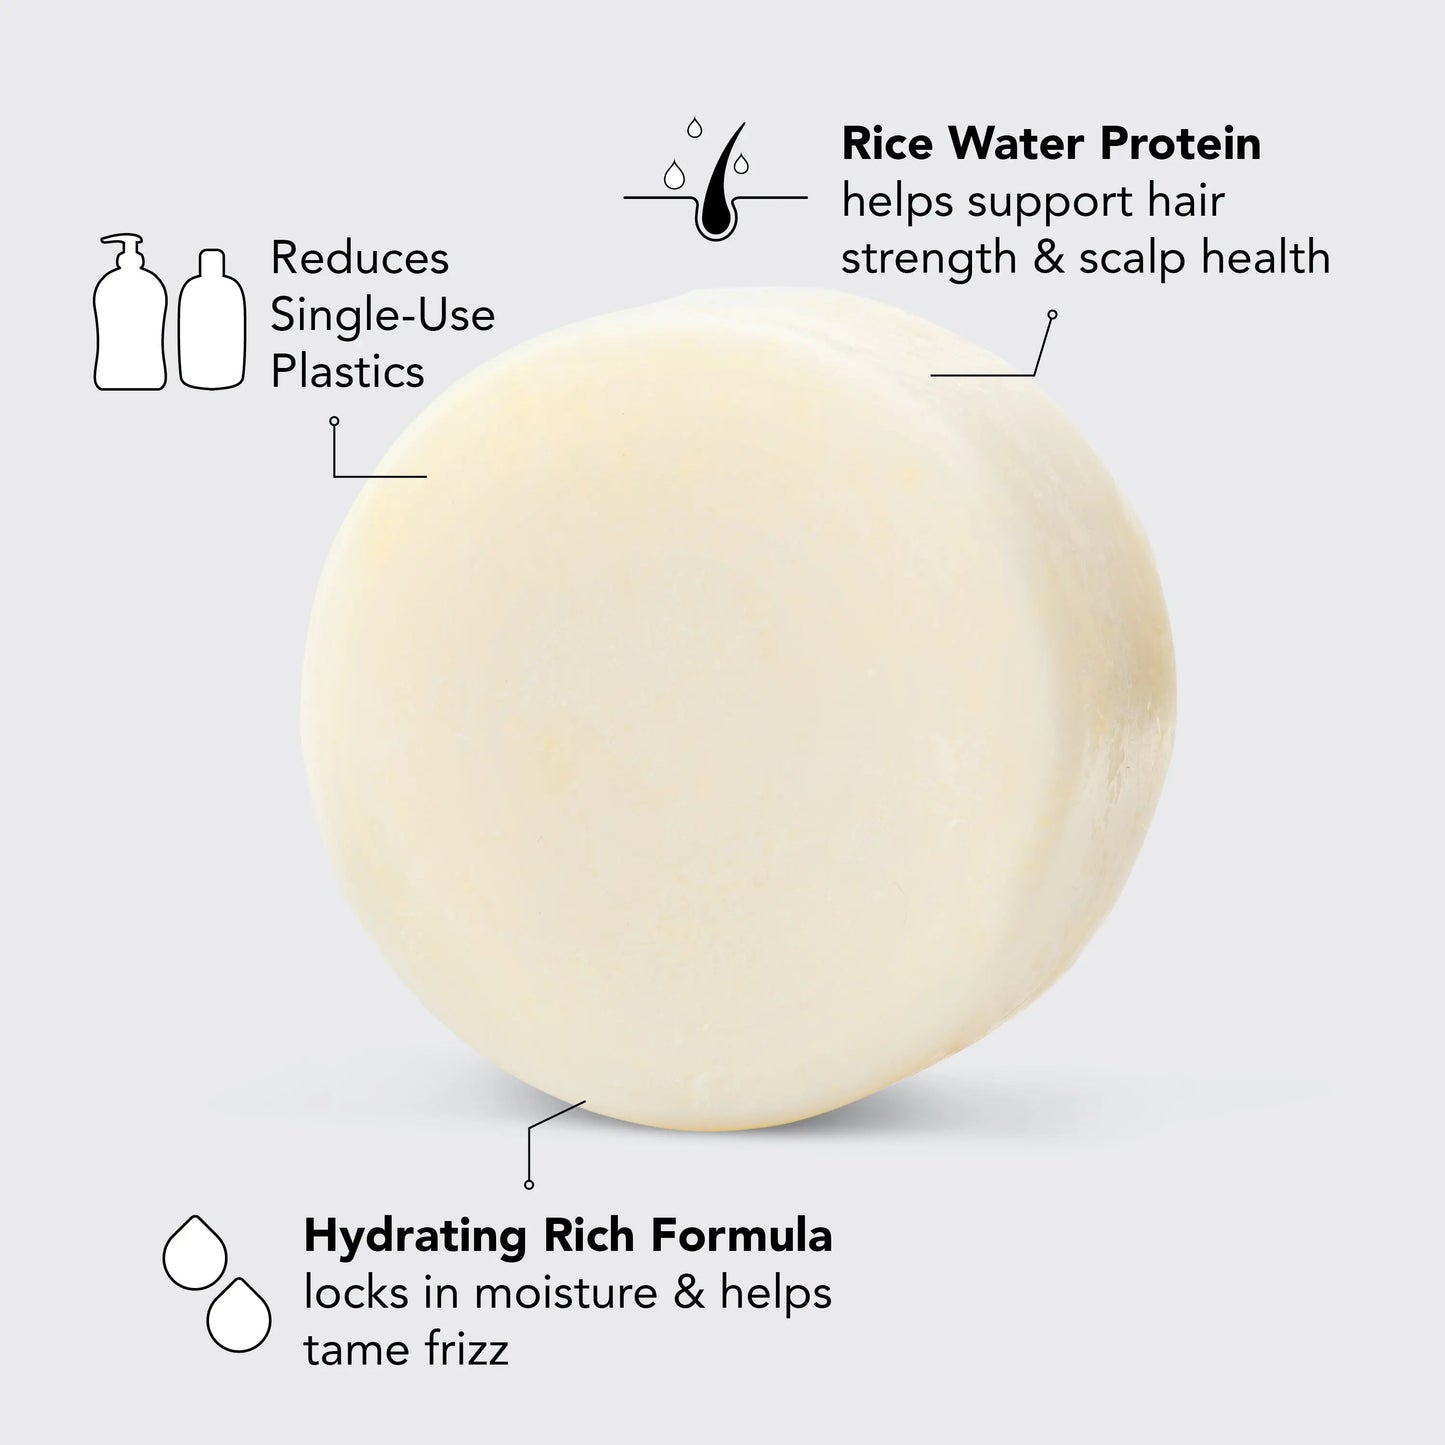 Strengthening Solid Conditioner with Rice Water Protein